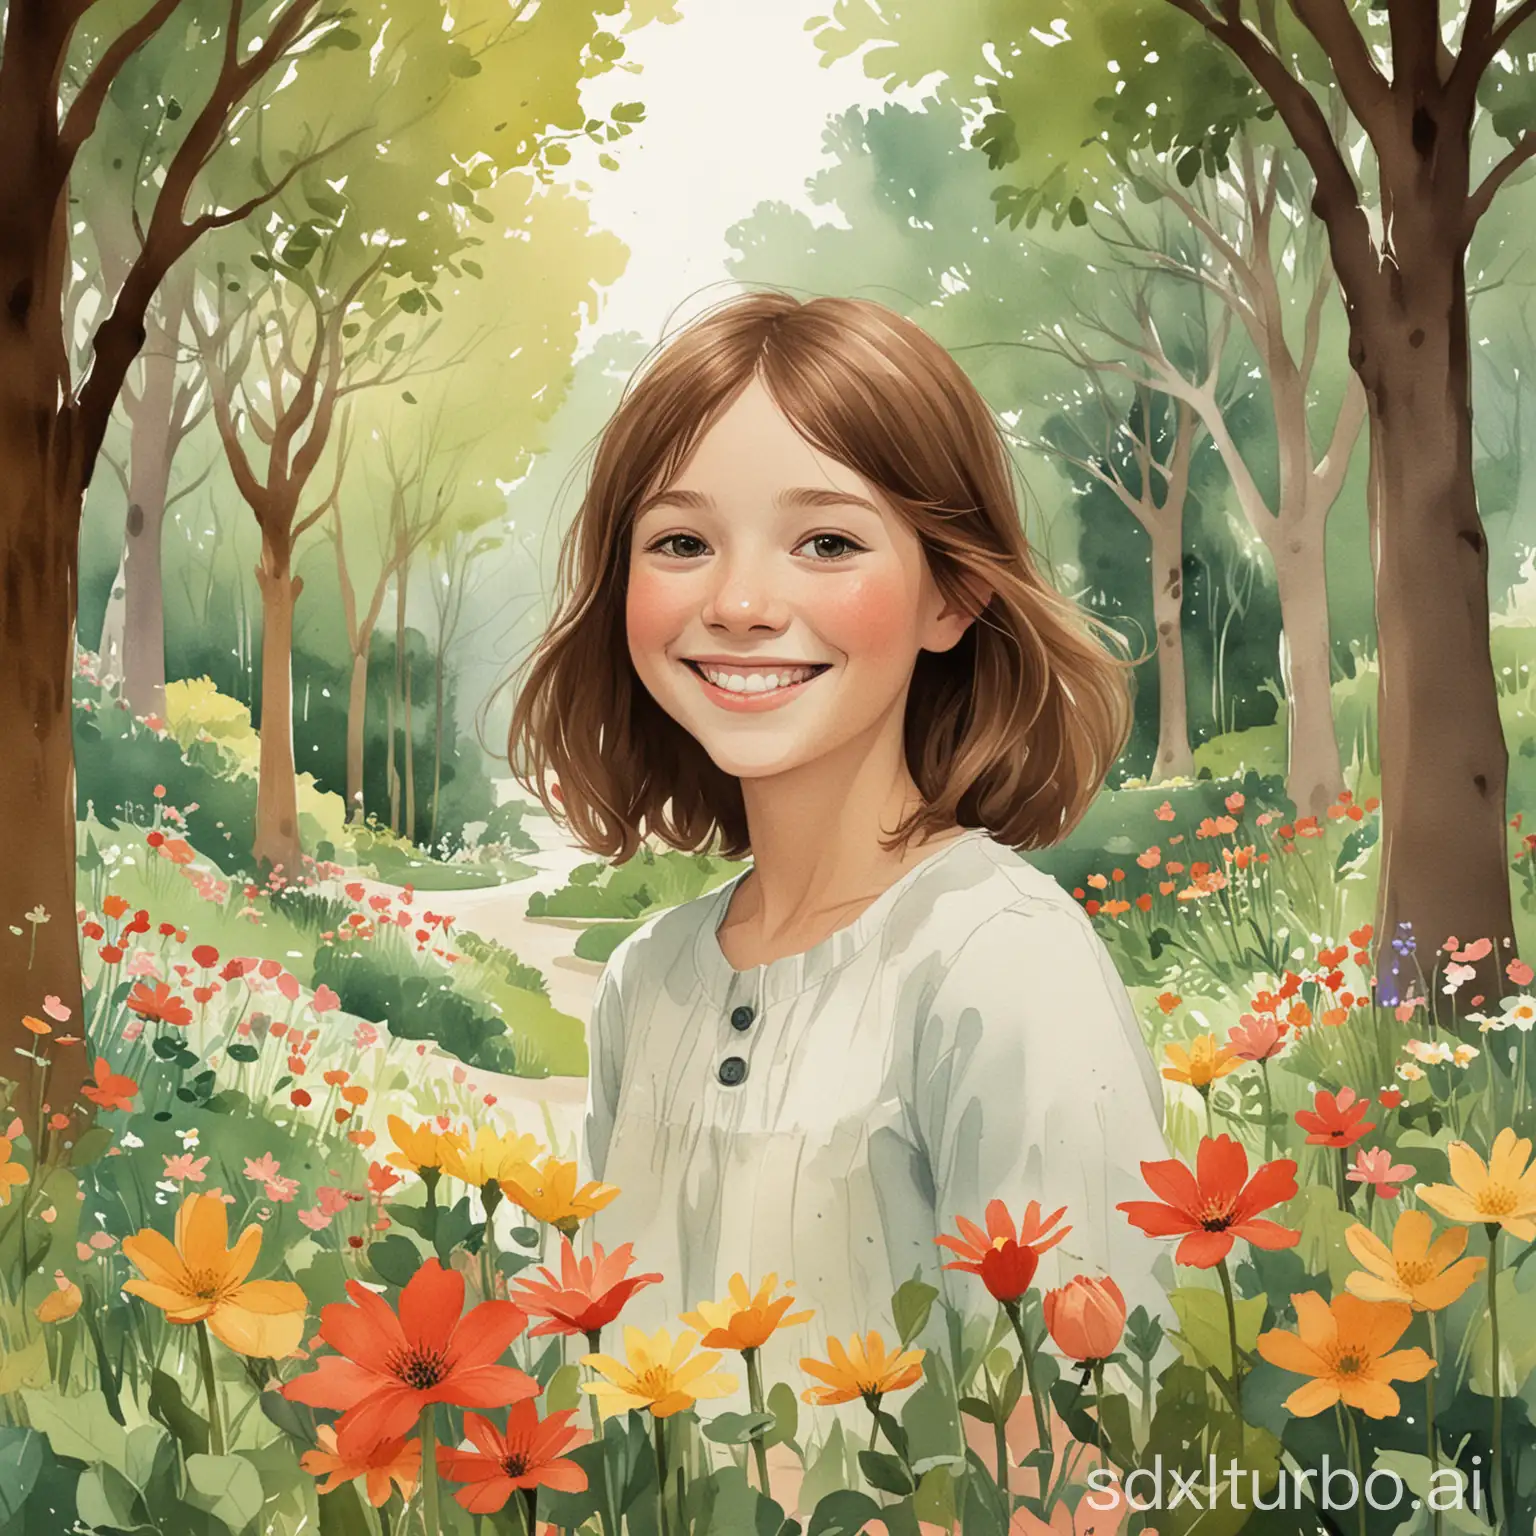 Illustration: Kate Sessions smiling among lush green trees and colorful flowers in Balboa Park.   Title: 'Mother of Balboa Park'   Subtitle: 'A Story of Nature's Love' or 'A Tale of Nature's Love' or ‘The Story of Kate Sessions’.  masterpiece, illustration, best quality, children's book, watercolor, close-up -1 little girl with brown hair smiling. Style of Jon Klassen